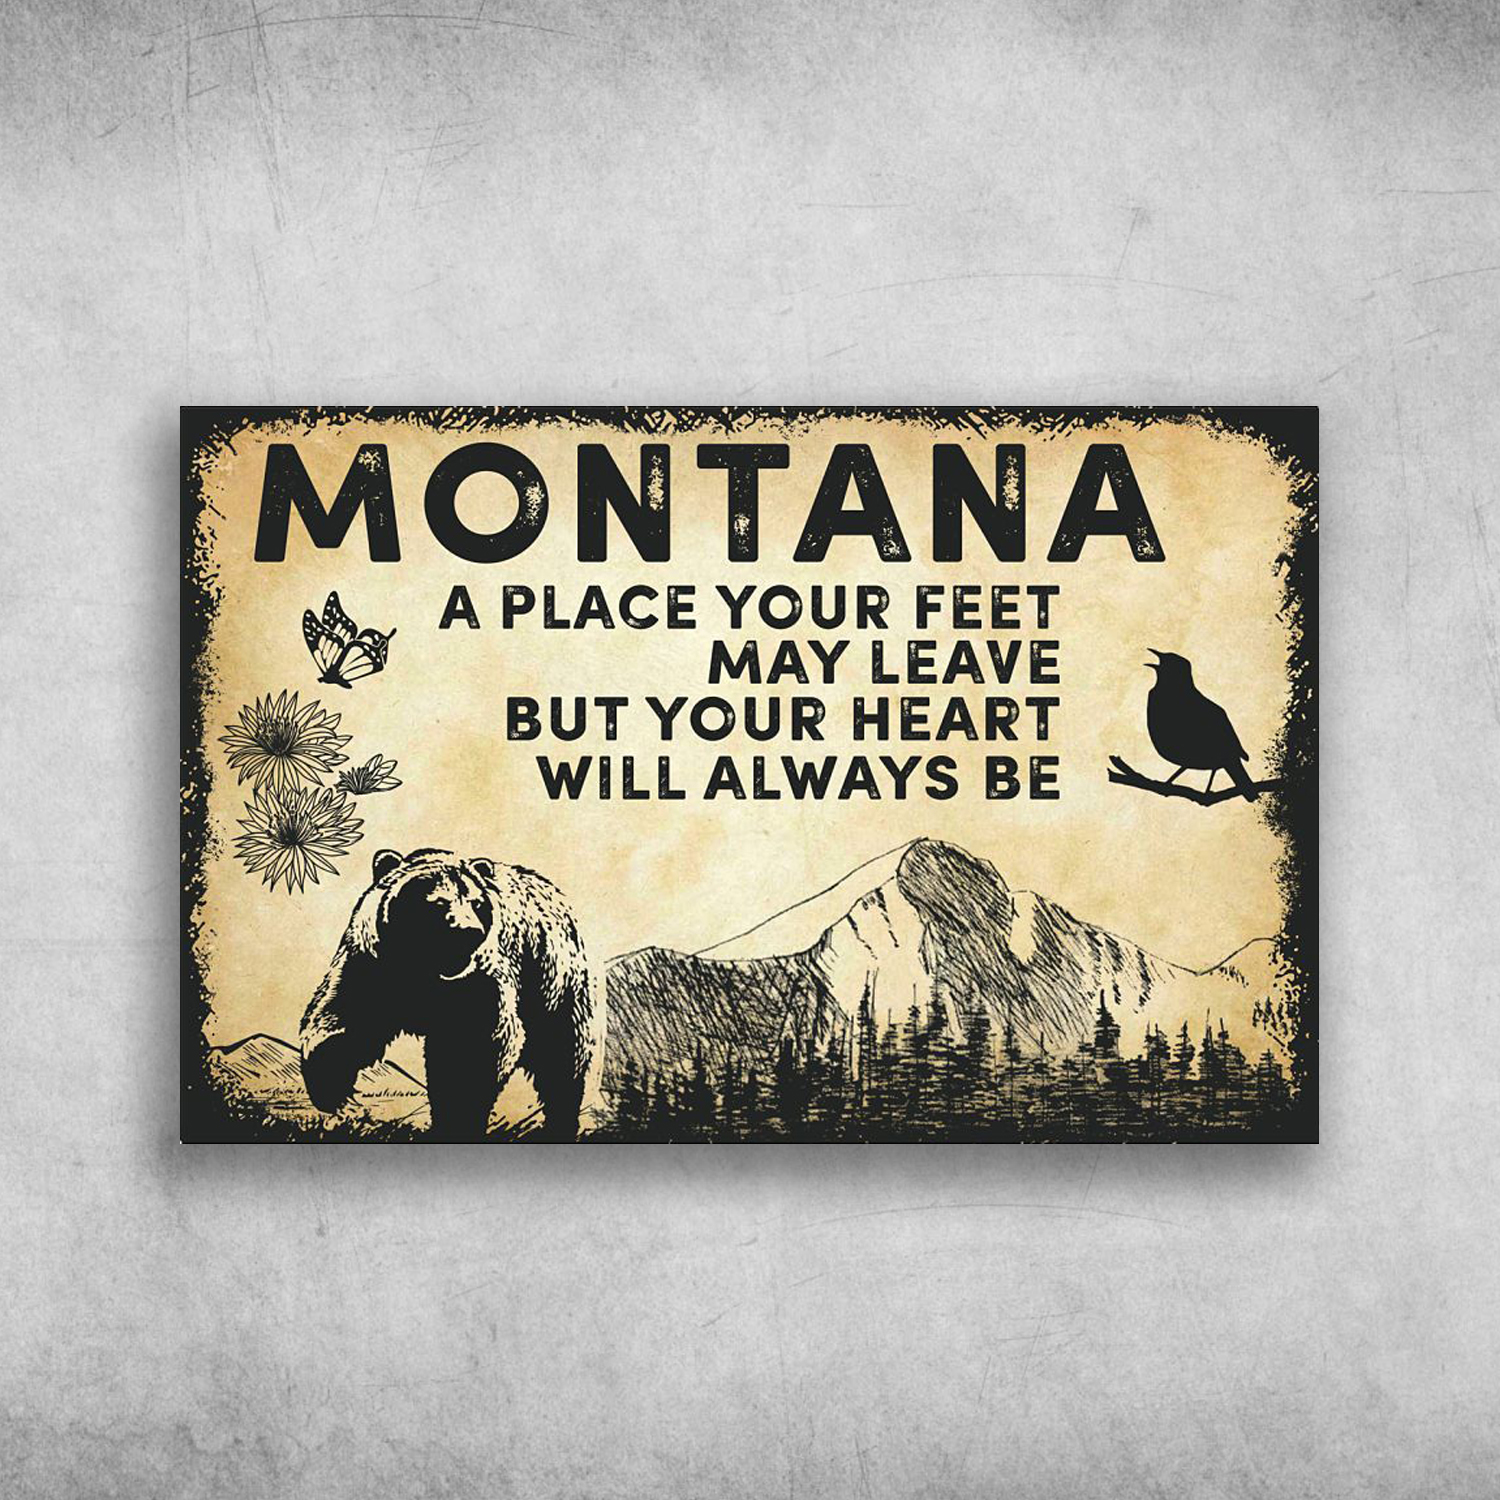 Montana America A PLace Your Feet May Leave